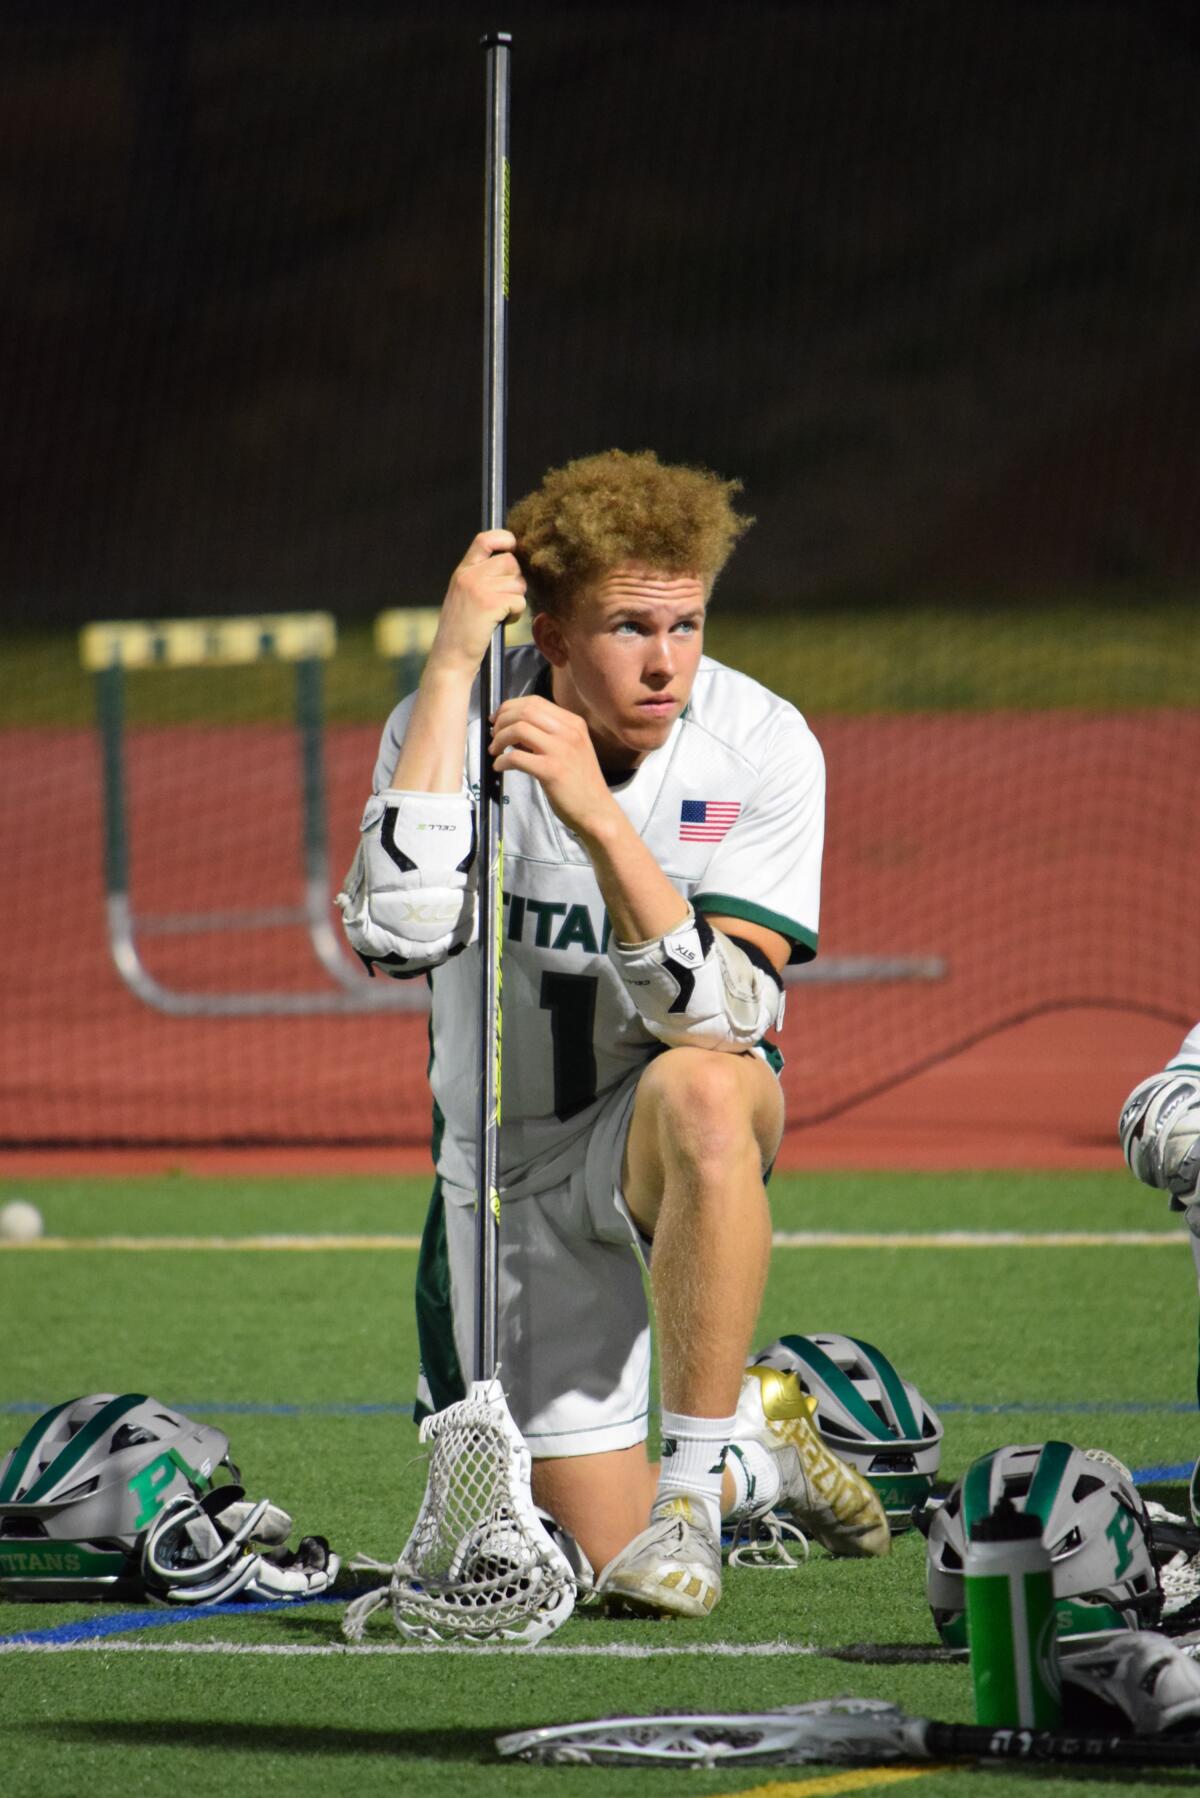 Eric Gant played football at Poway for four years. But this spring he kept a promise to friends: he played lacrosse. 